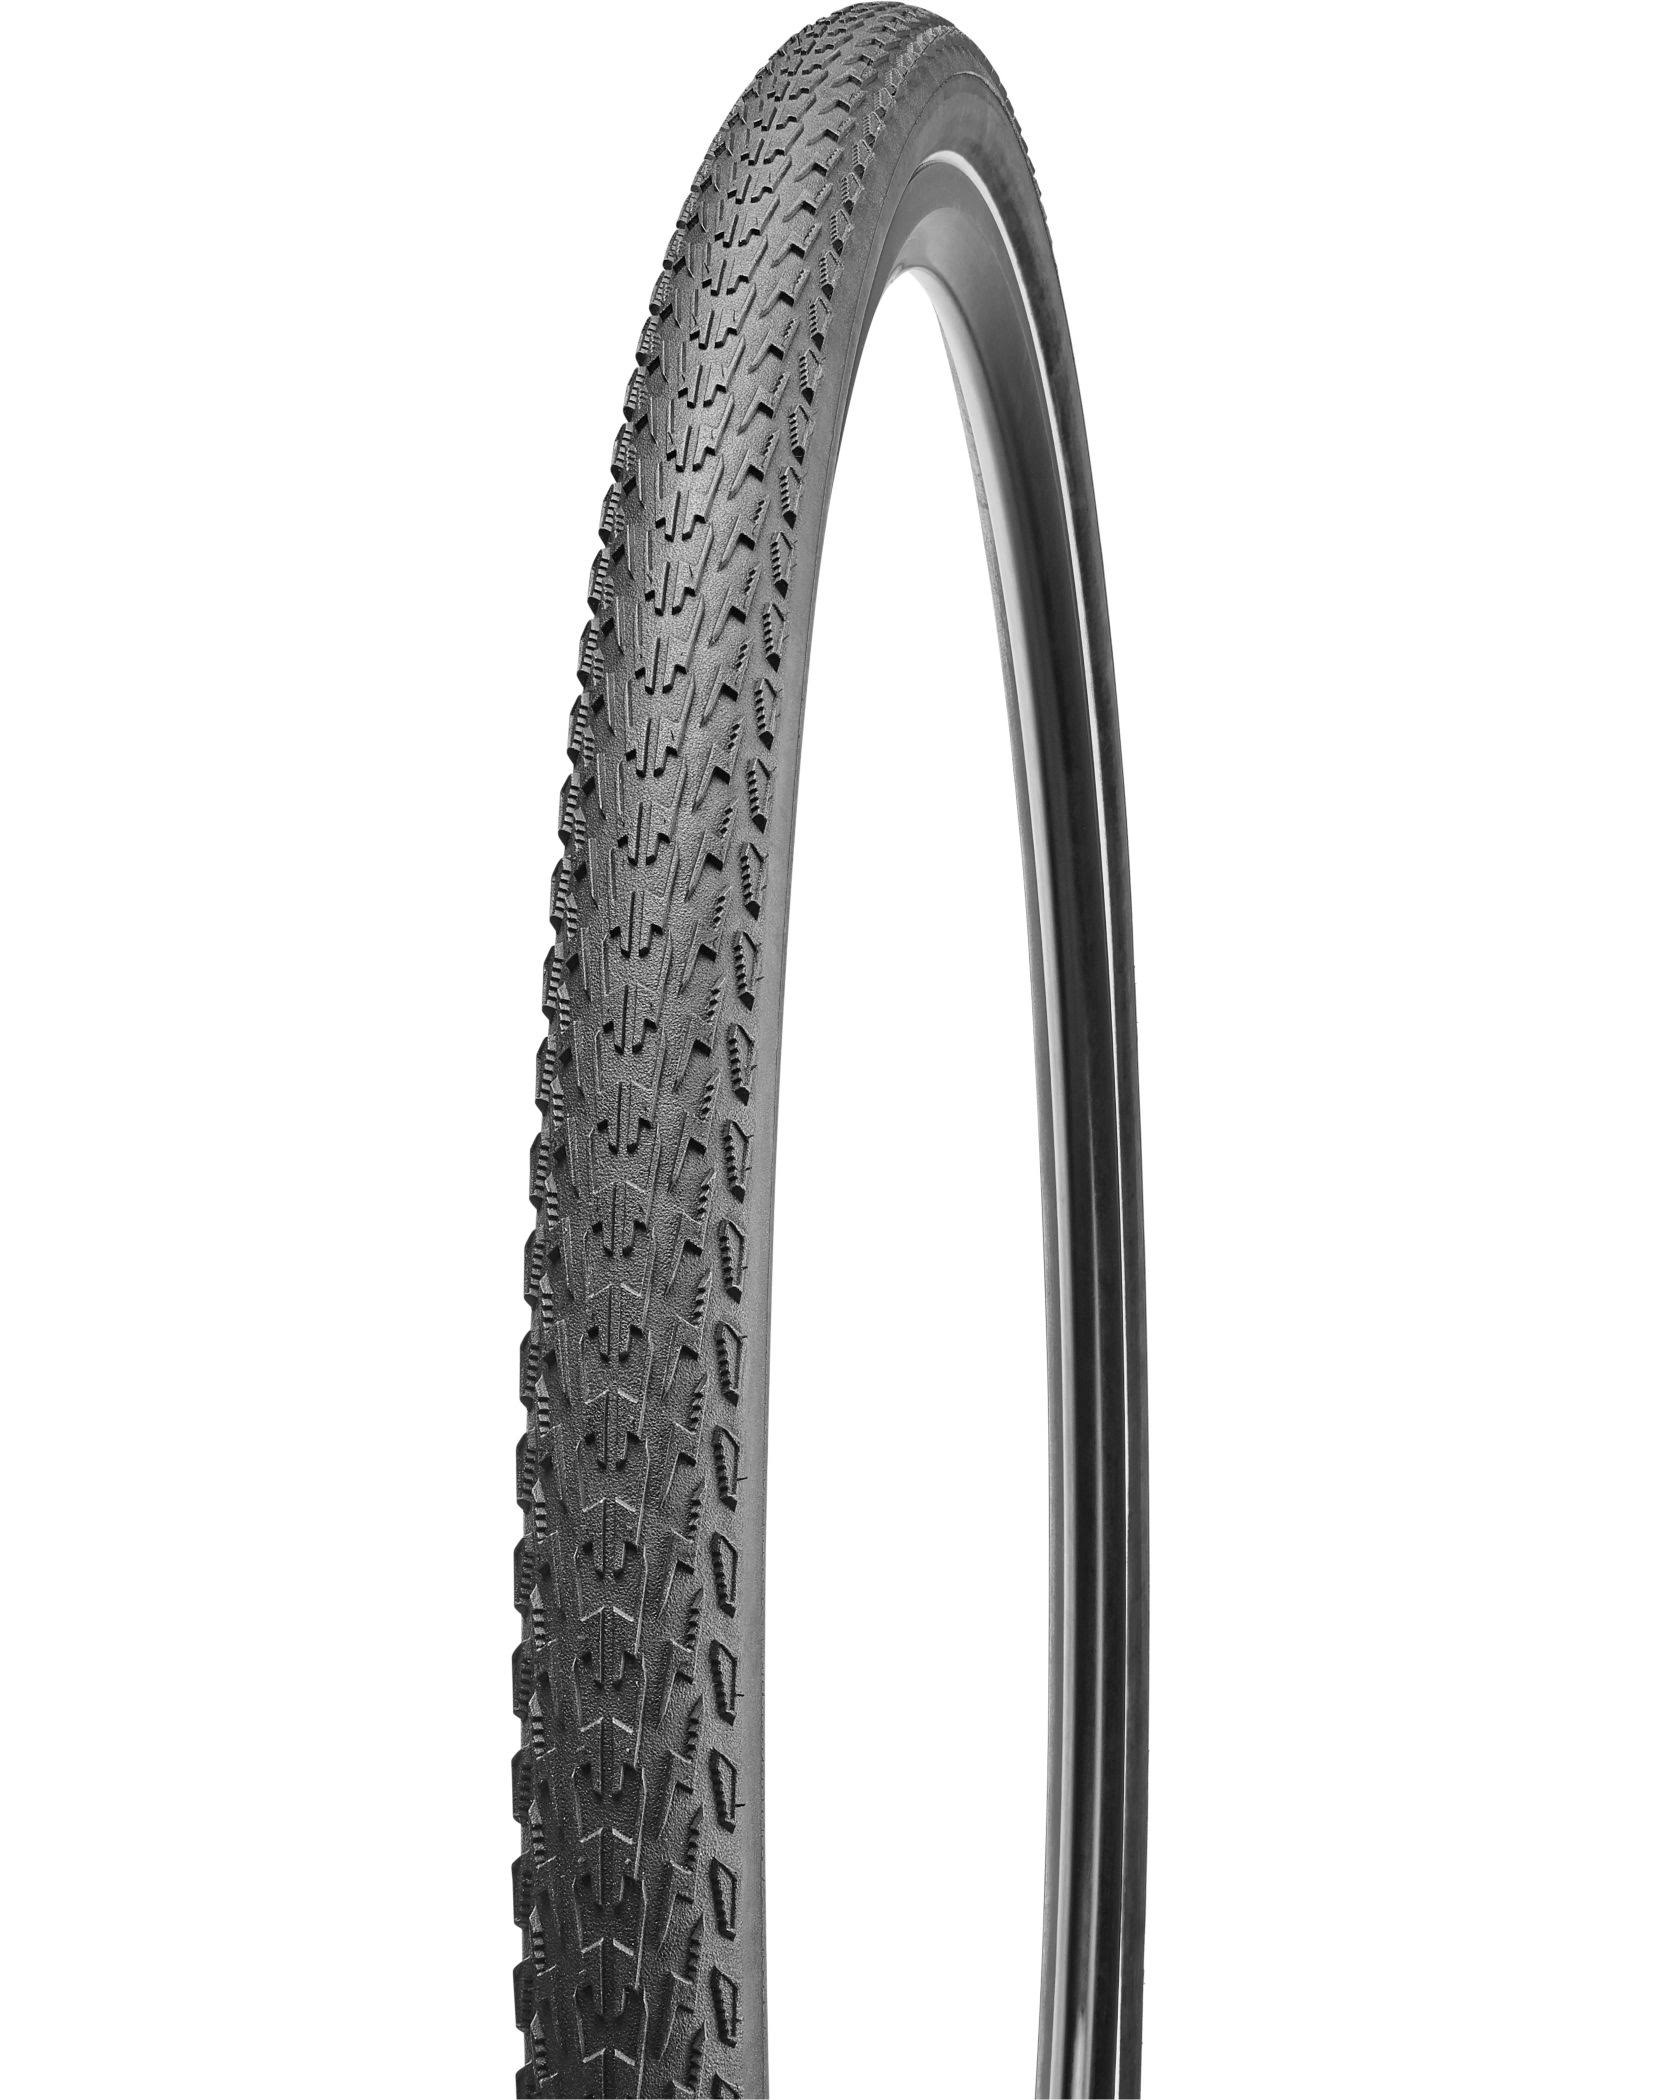 Specialized Tracer Pro 2Bliss Ready Cyclocross Tyre